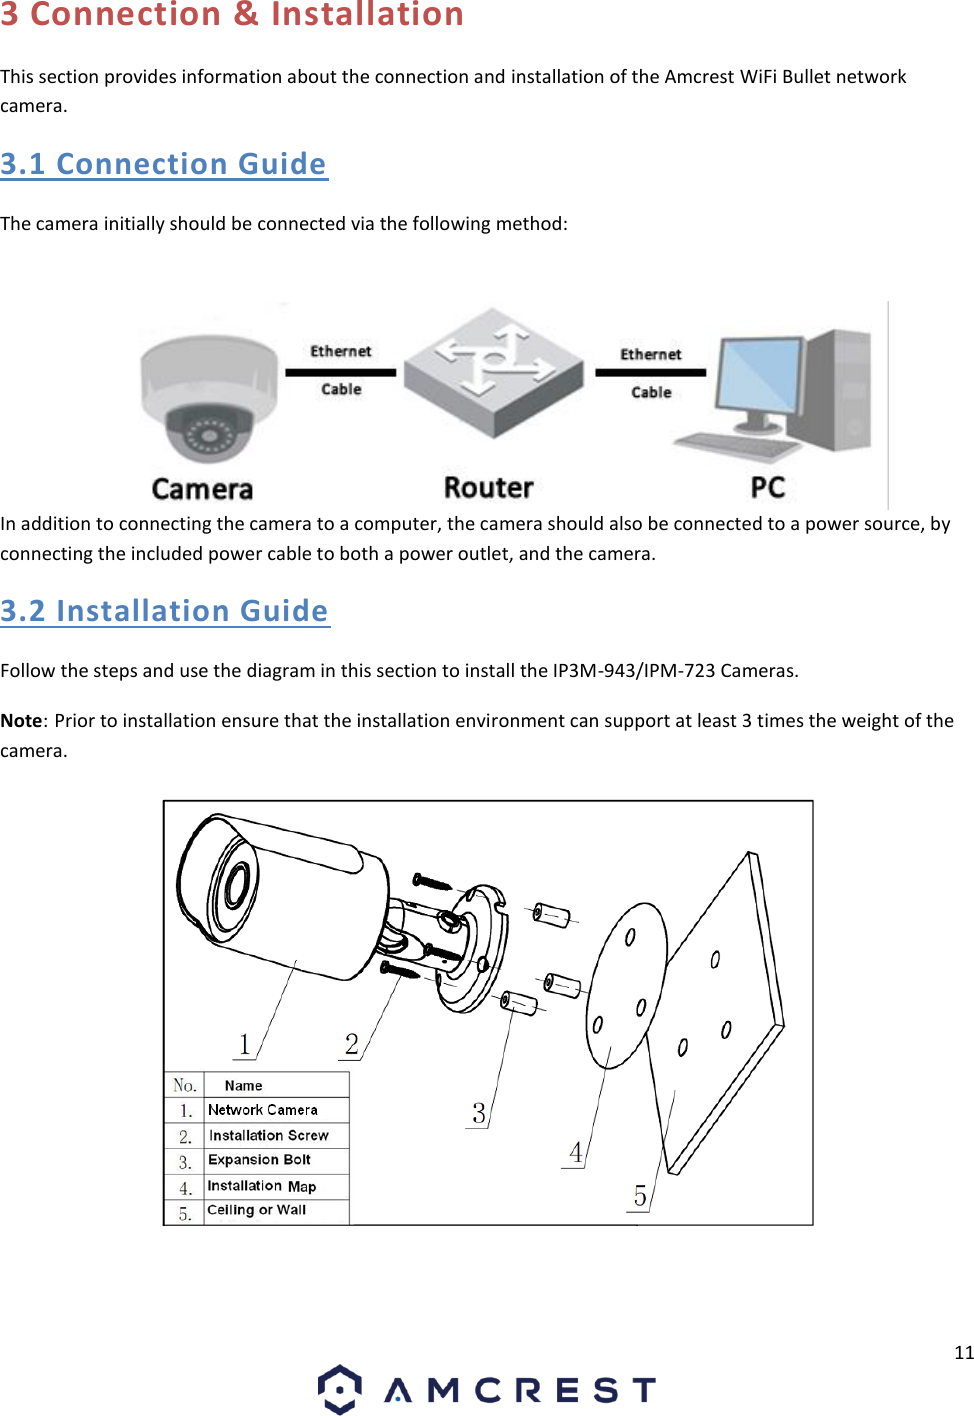 11 3 Connection &amp; Installation This section provides information about the connection and installation of the Amcrest WiFi Bullet network camera. 3.1 Connection Guide The camera initially should be connected via the following method: In addition to connecting the camera to a computer, the camera should also be connected to a power source, by connecting the included power cable to both a power outlet, and the camera. 3.2 Installation Guide Follow the steps and use the diagram in this section to install the IP3M-943/IPM-723 Cameras. Note: Prior to installation ensure that the installation environment can support at least 3 times the weight of the camera. 